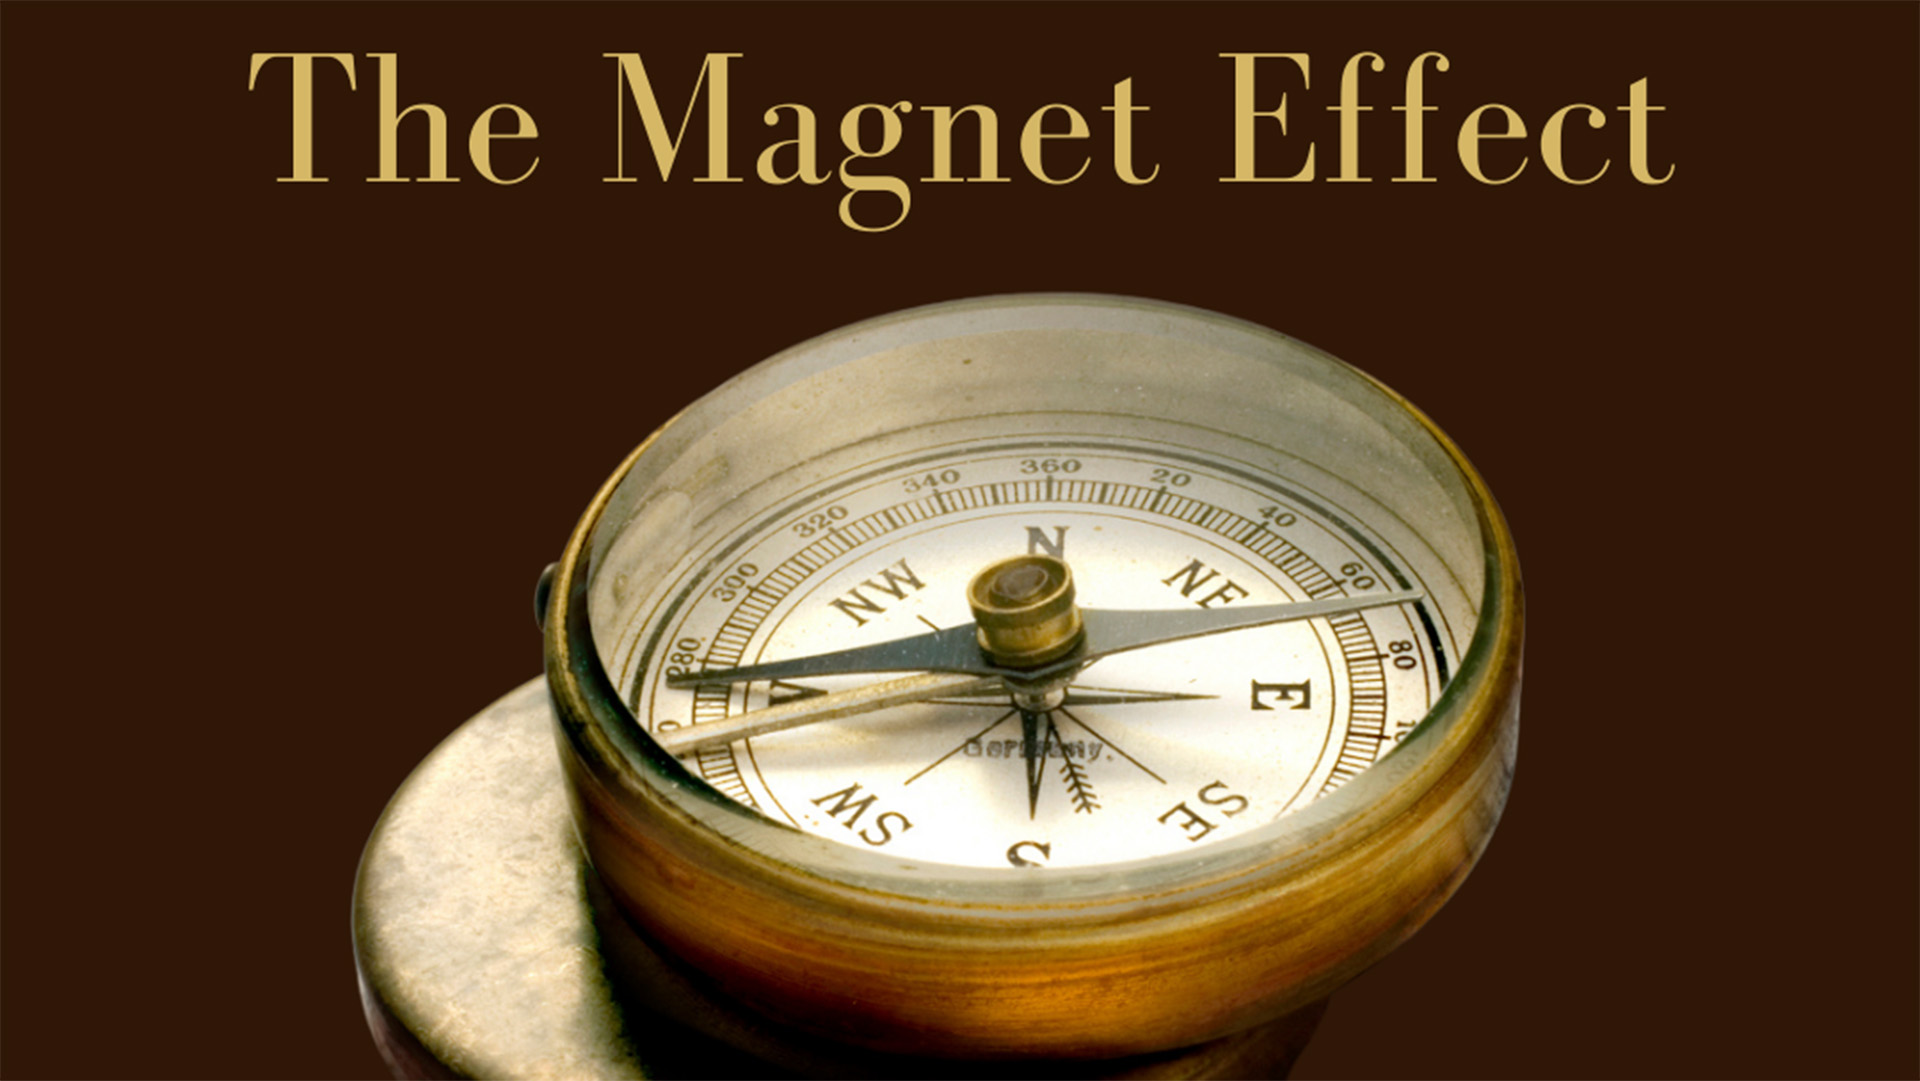 Magnet Effect - May sermon series